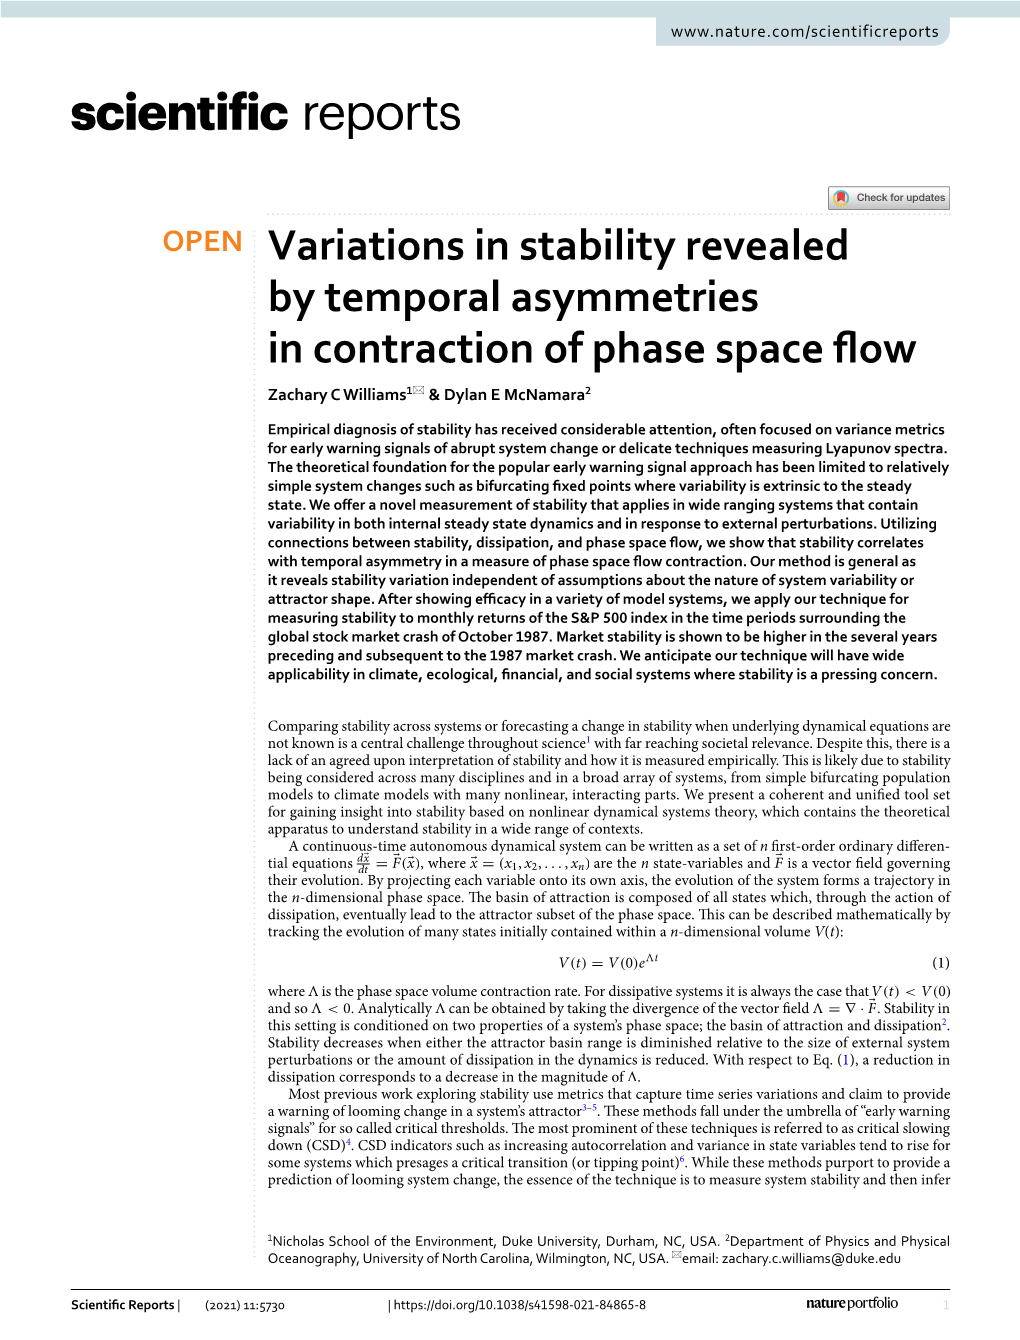 Variations in Stability Revealed by Temporal Asymmetries in Contraction of Phase Space Fow Zachary C Williams1* & Dylan E Mcnamara2